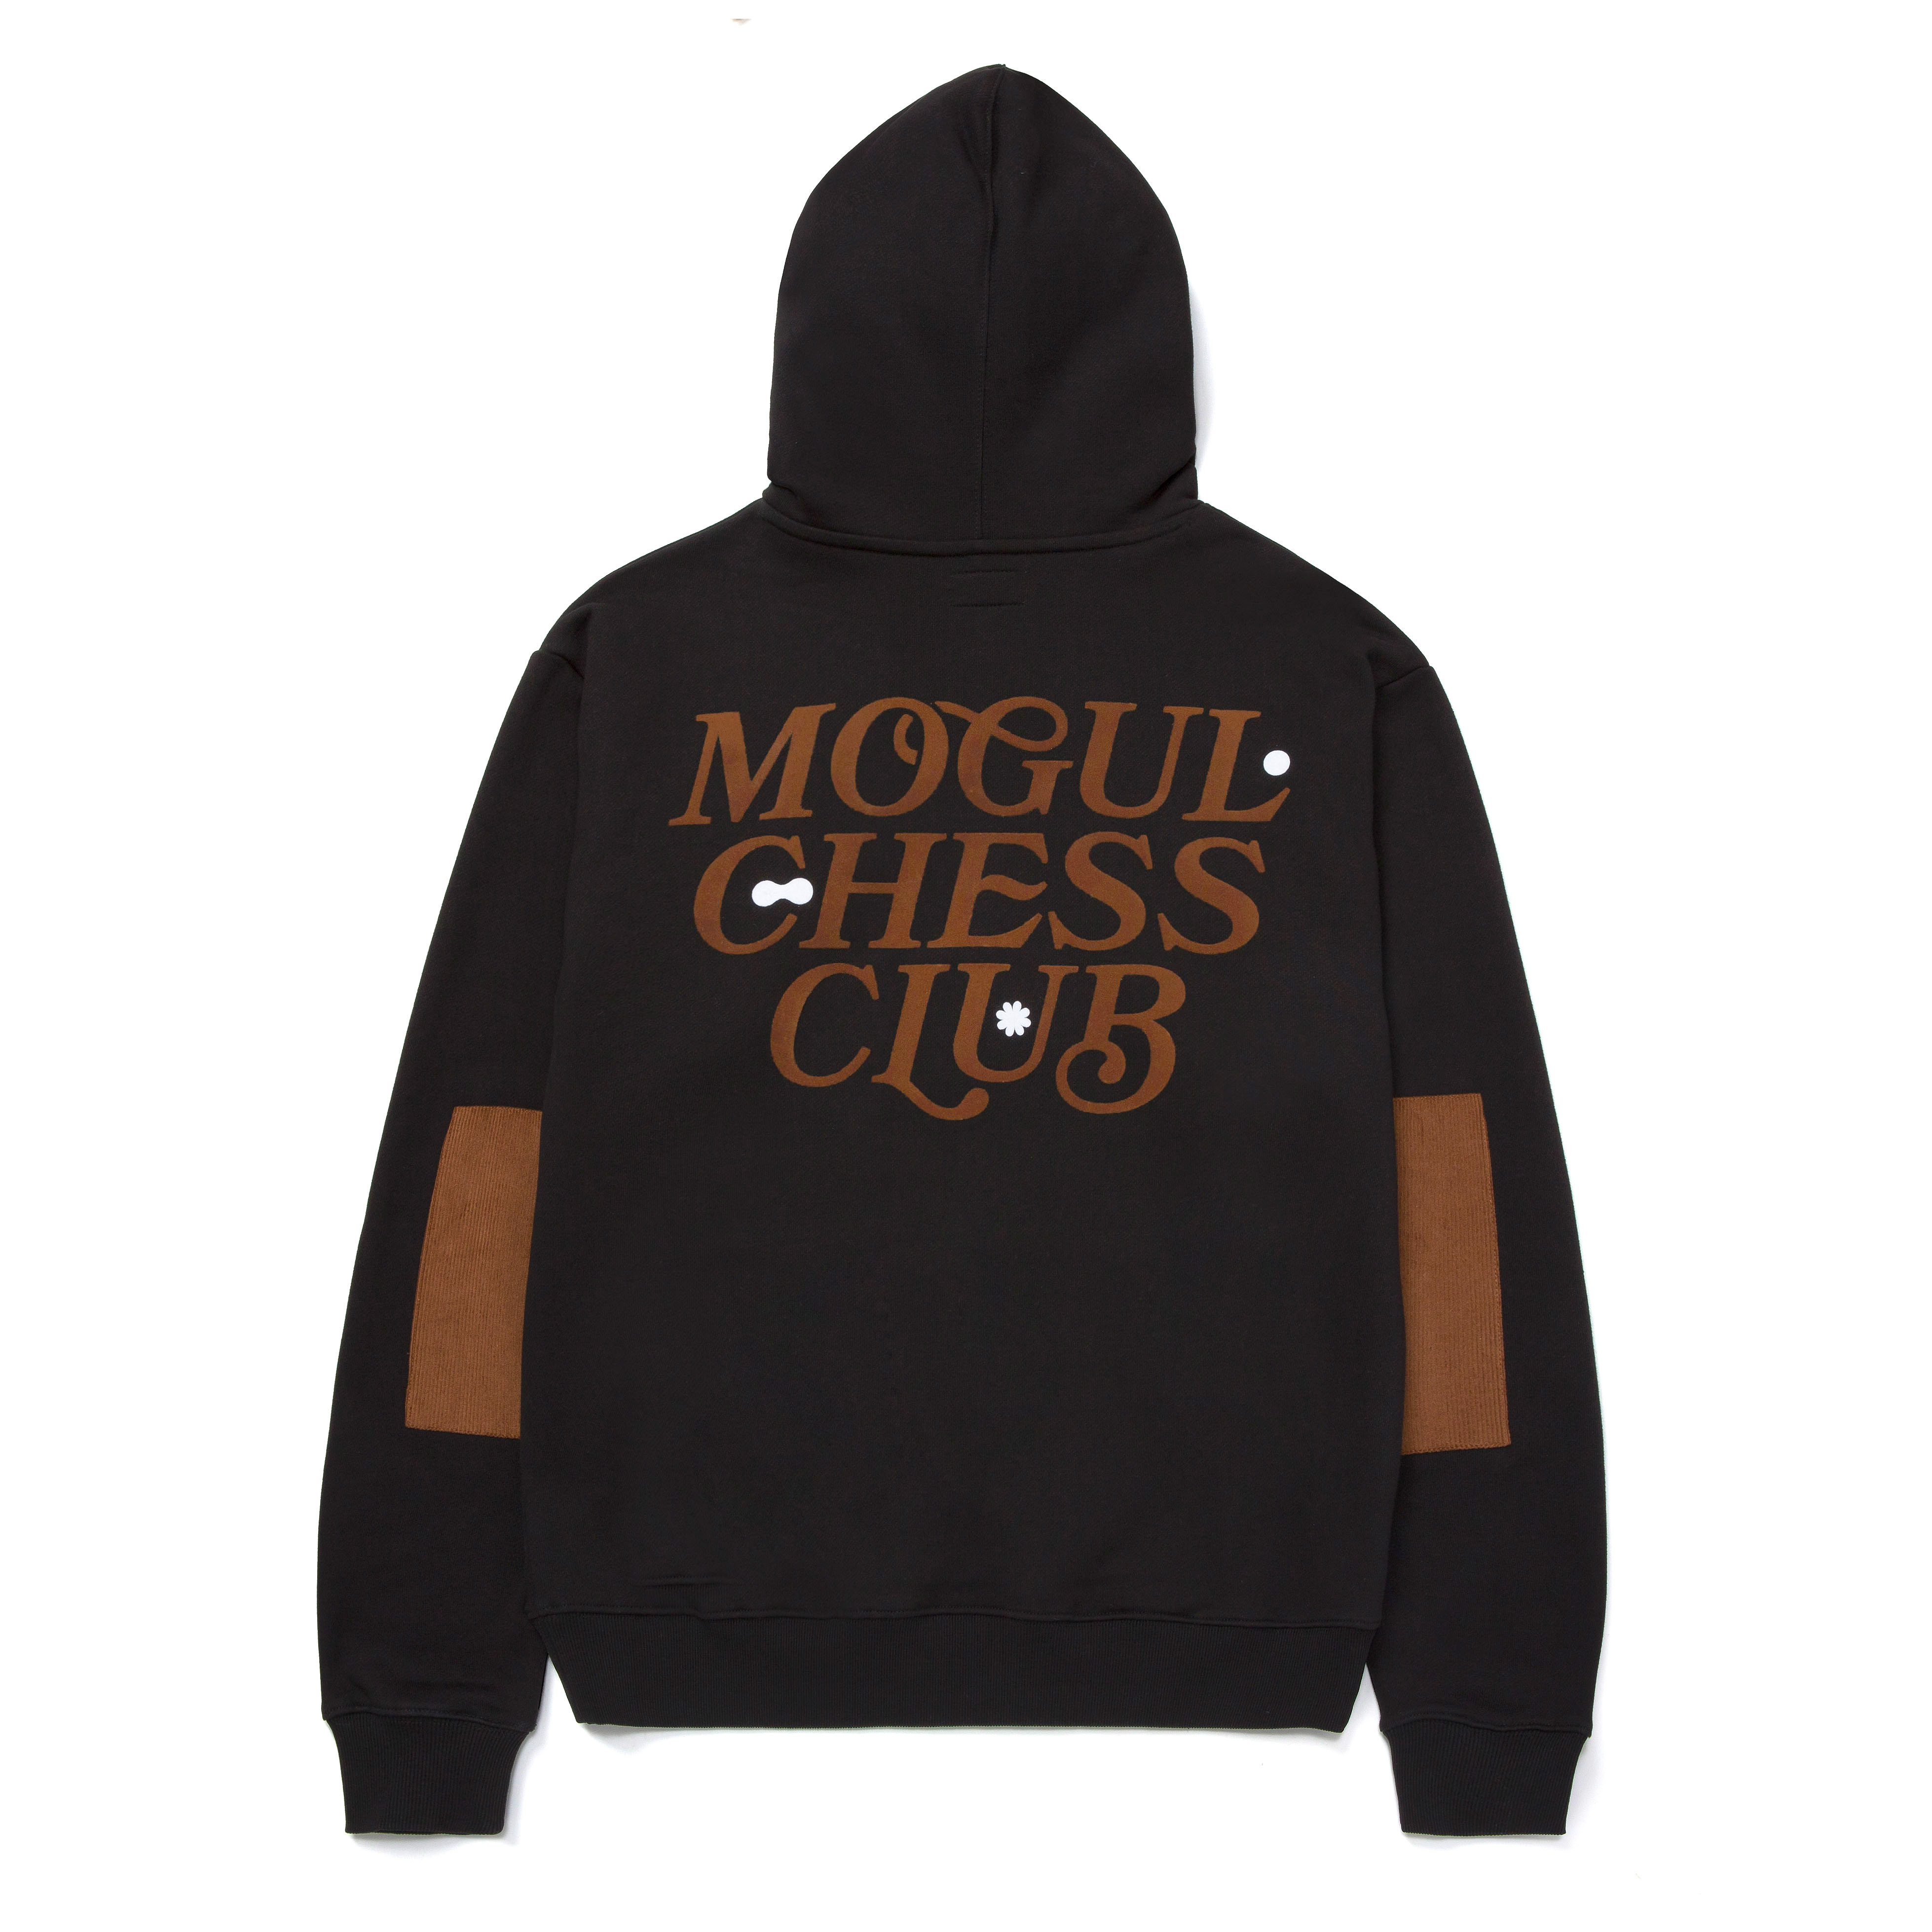 Ludwig chess boxing merch chess club shirt, hoodie, sweater, long sleeve  and tank top